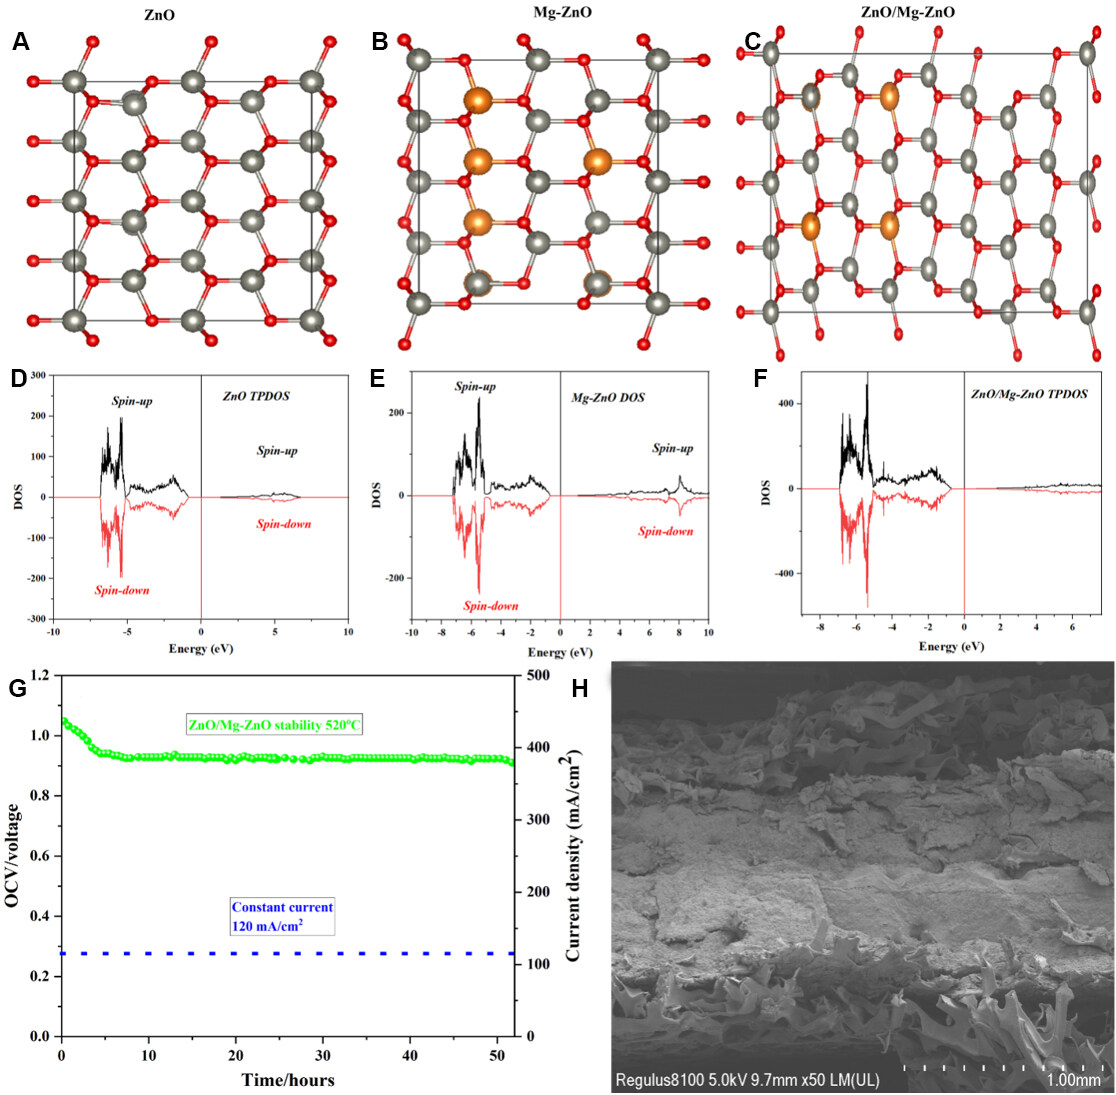 ZnO/MgZnO heterostructure membrane with type II band alignment for ceramic fuel cells